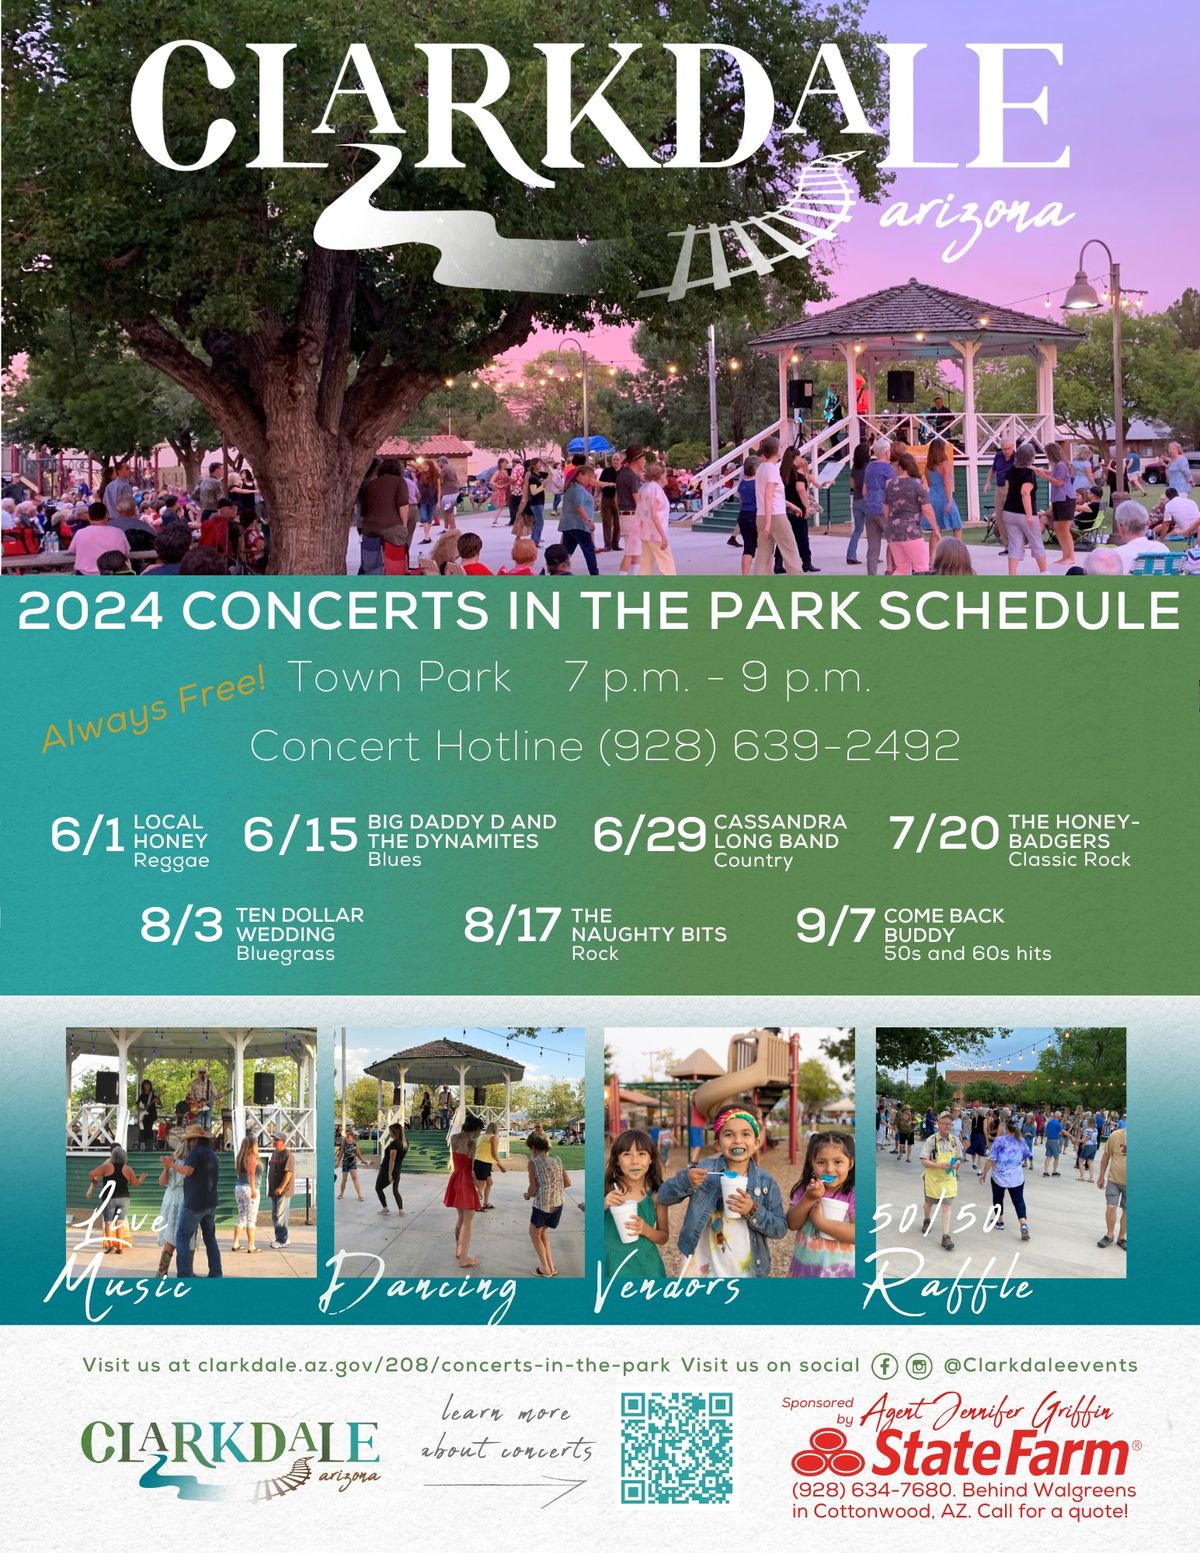 2024 Concerts in the Park Featuring The Naughty Bits, Clarkdale Park, 17 August 2024